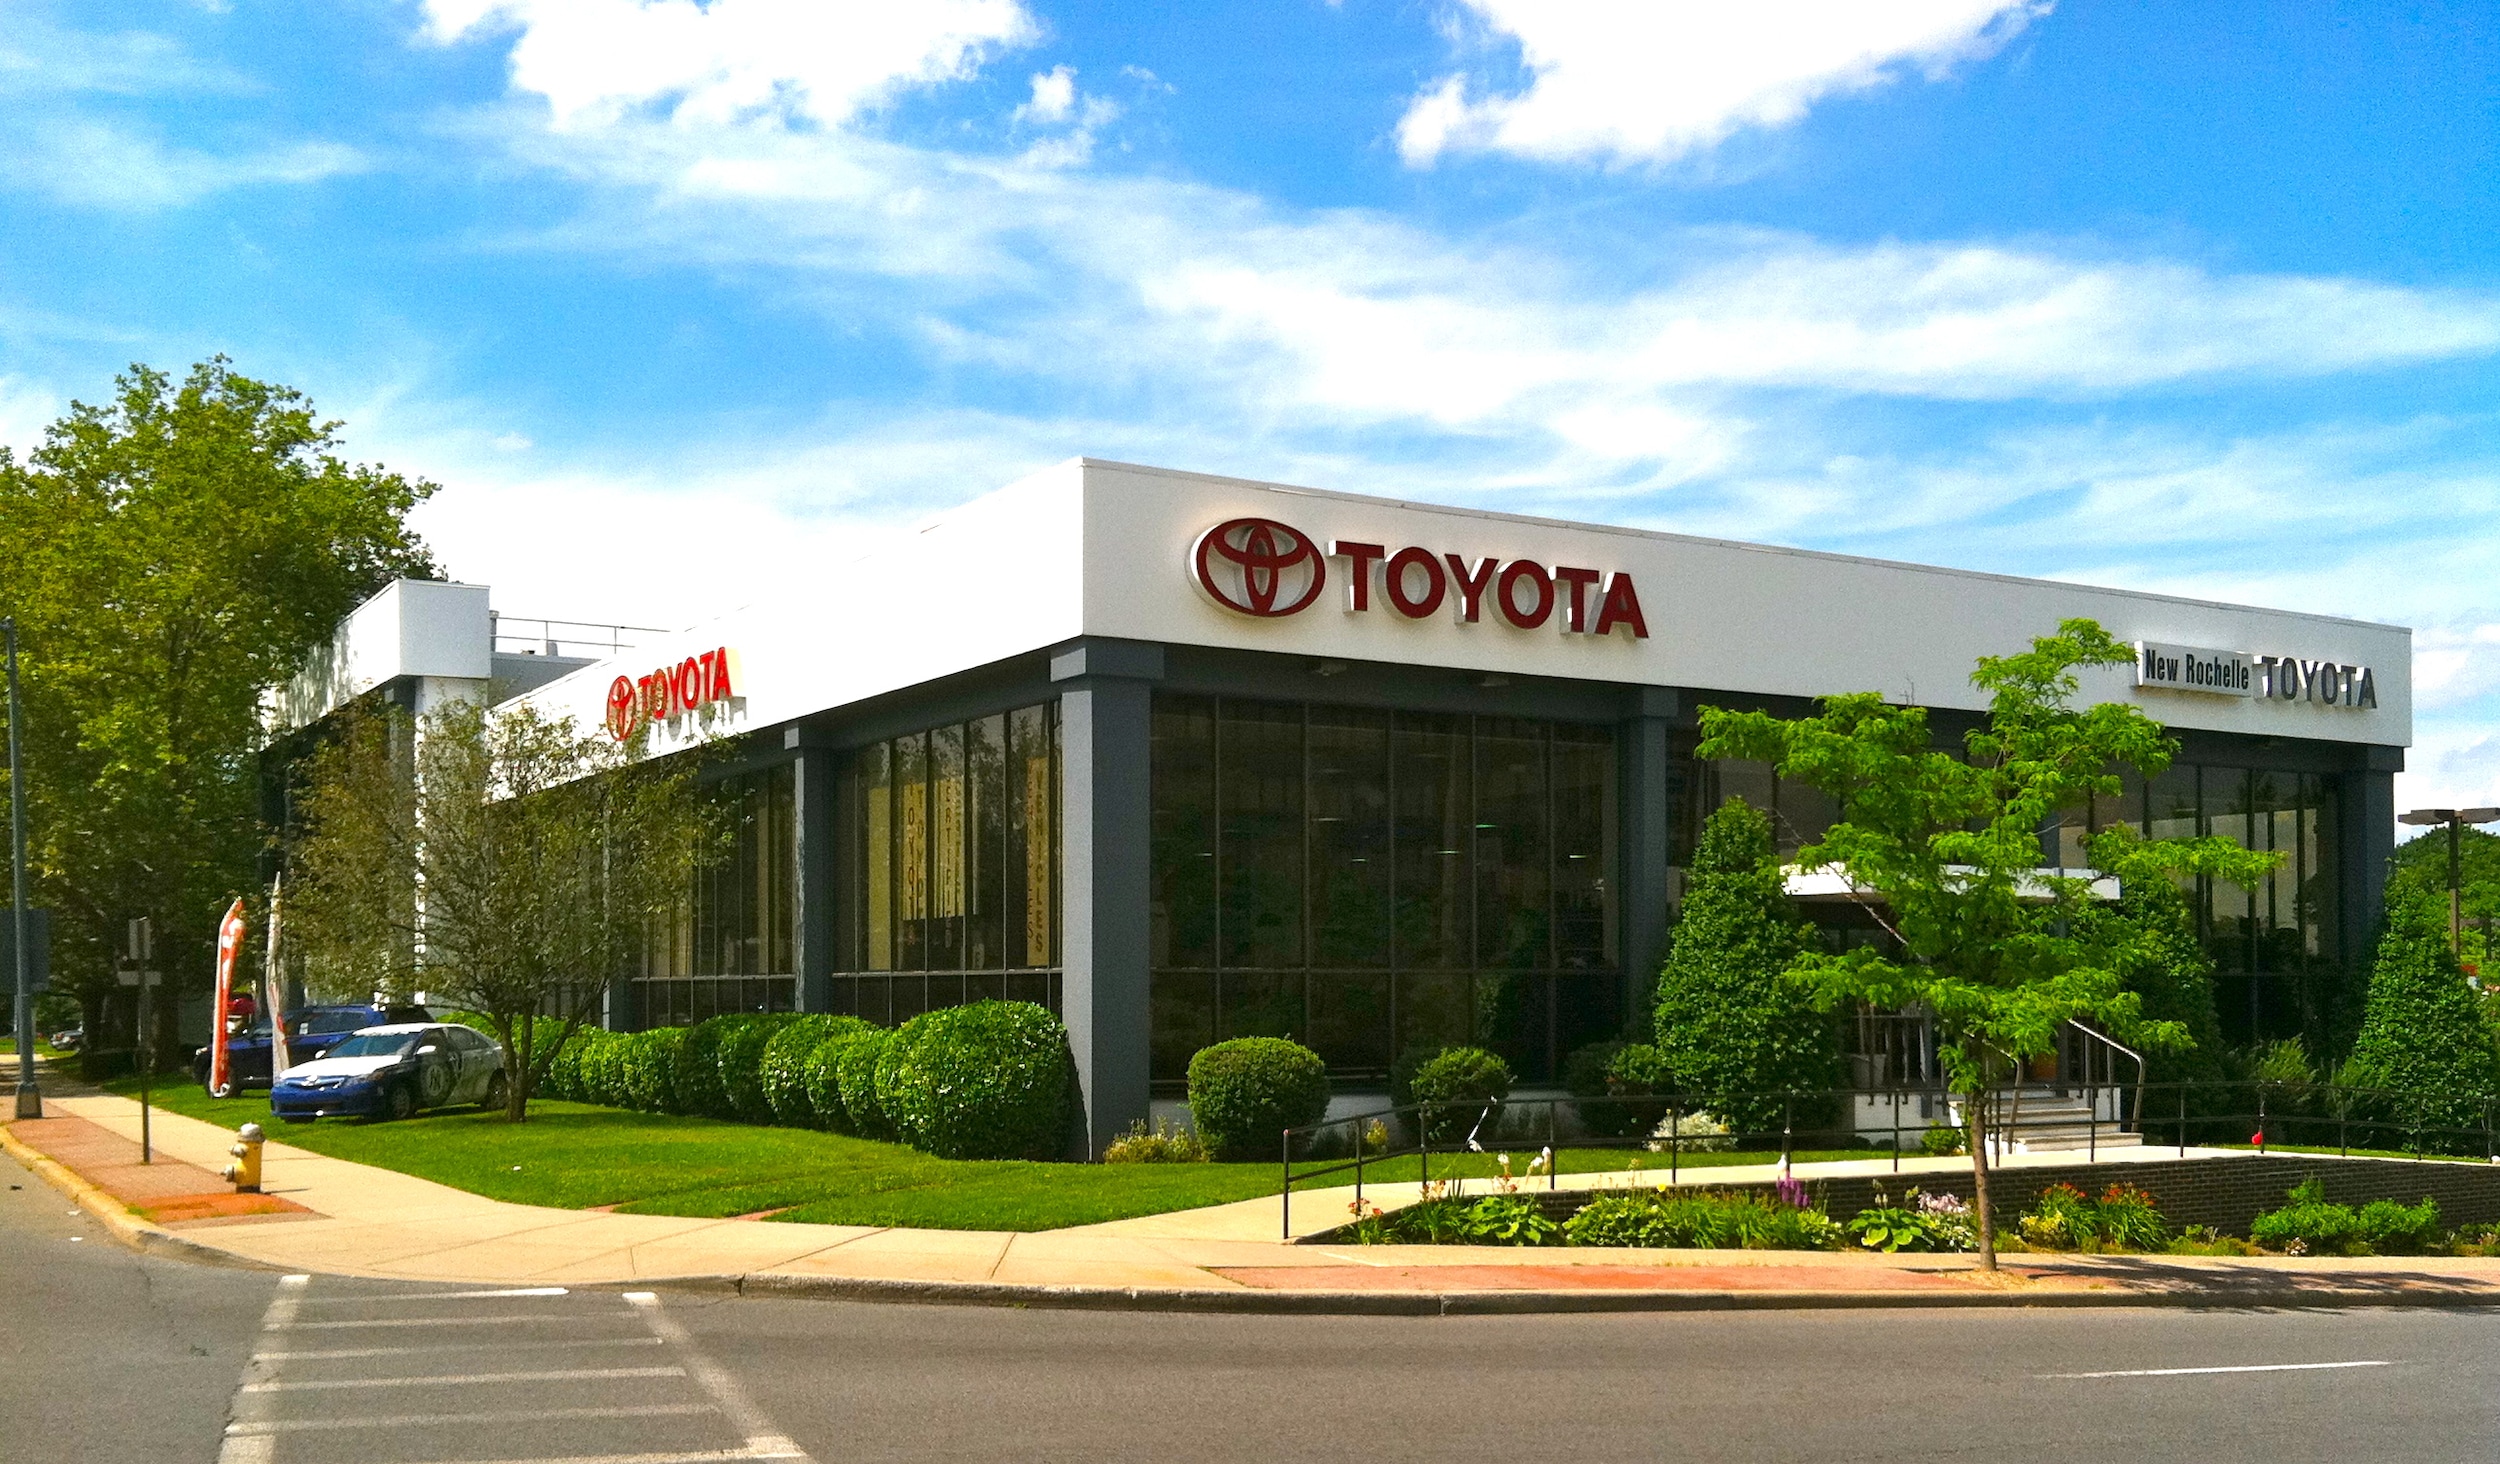 south jersey toyota dealers #1